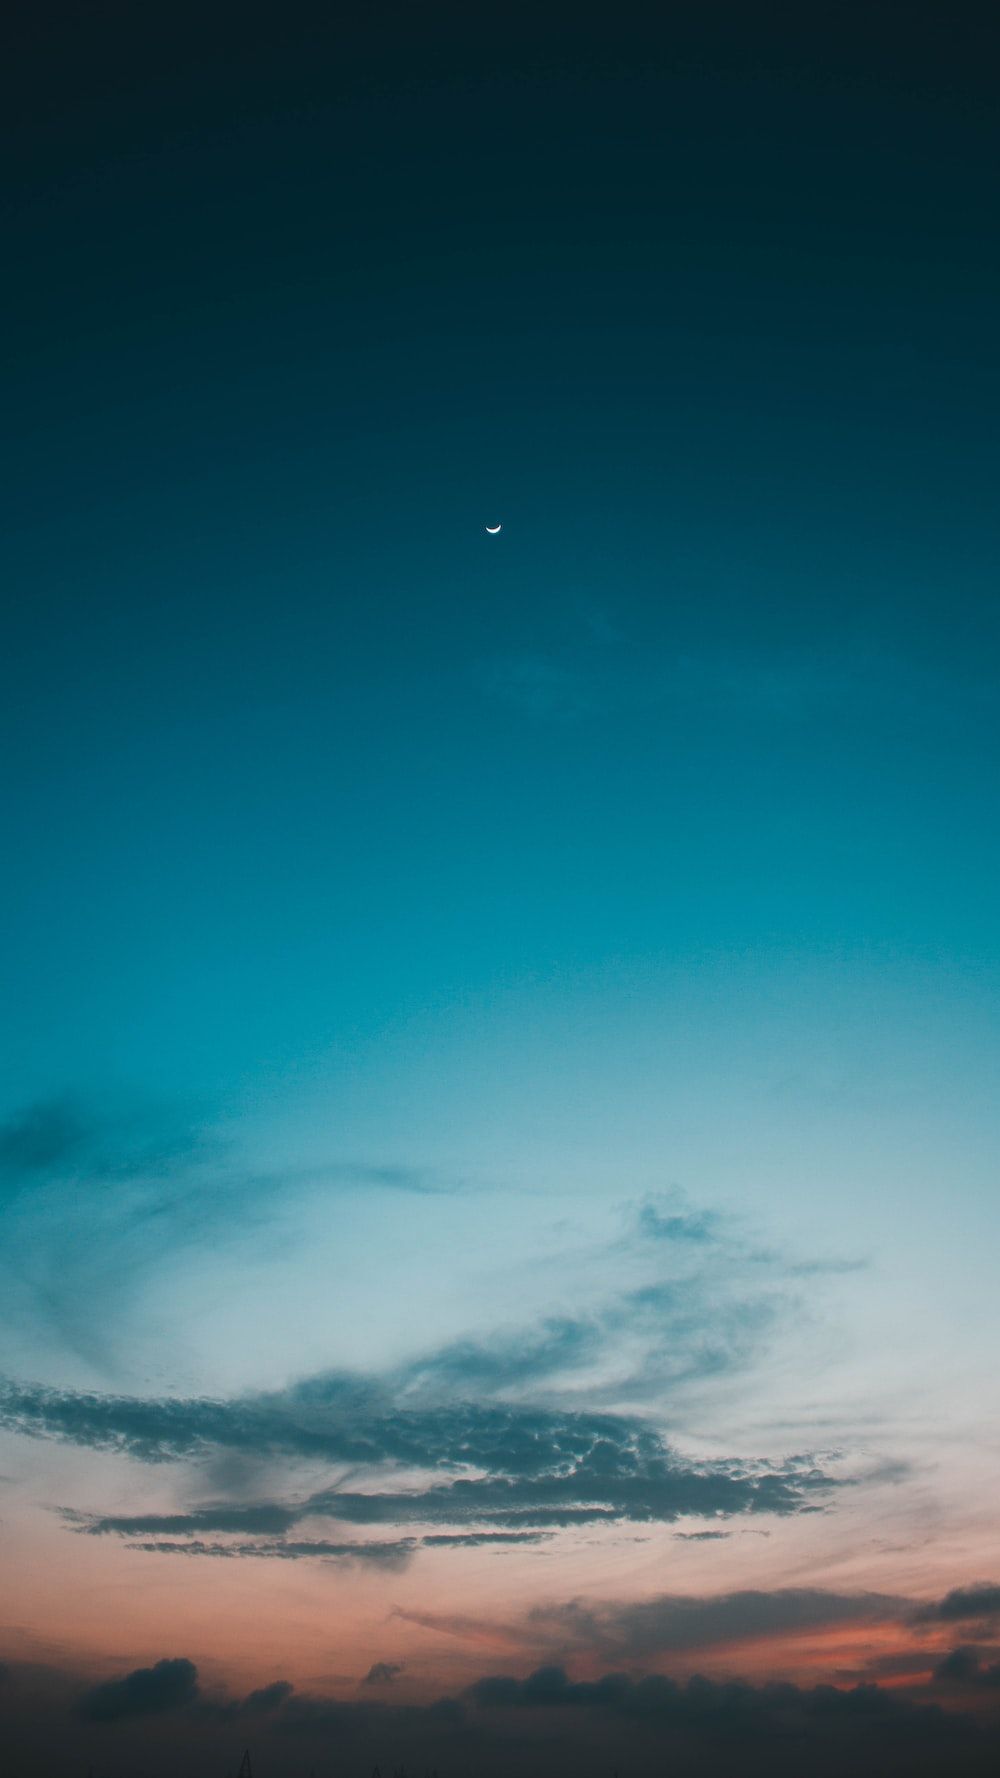 Cyan Sky Picture. Download Free Image